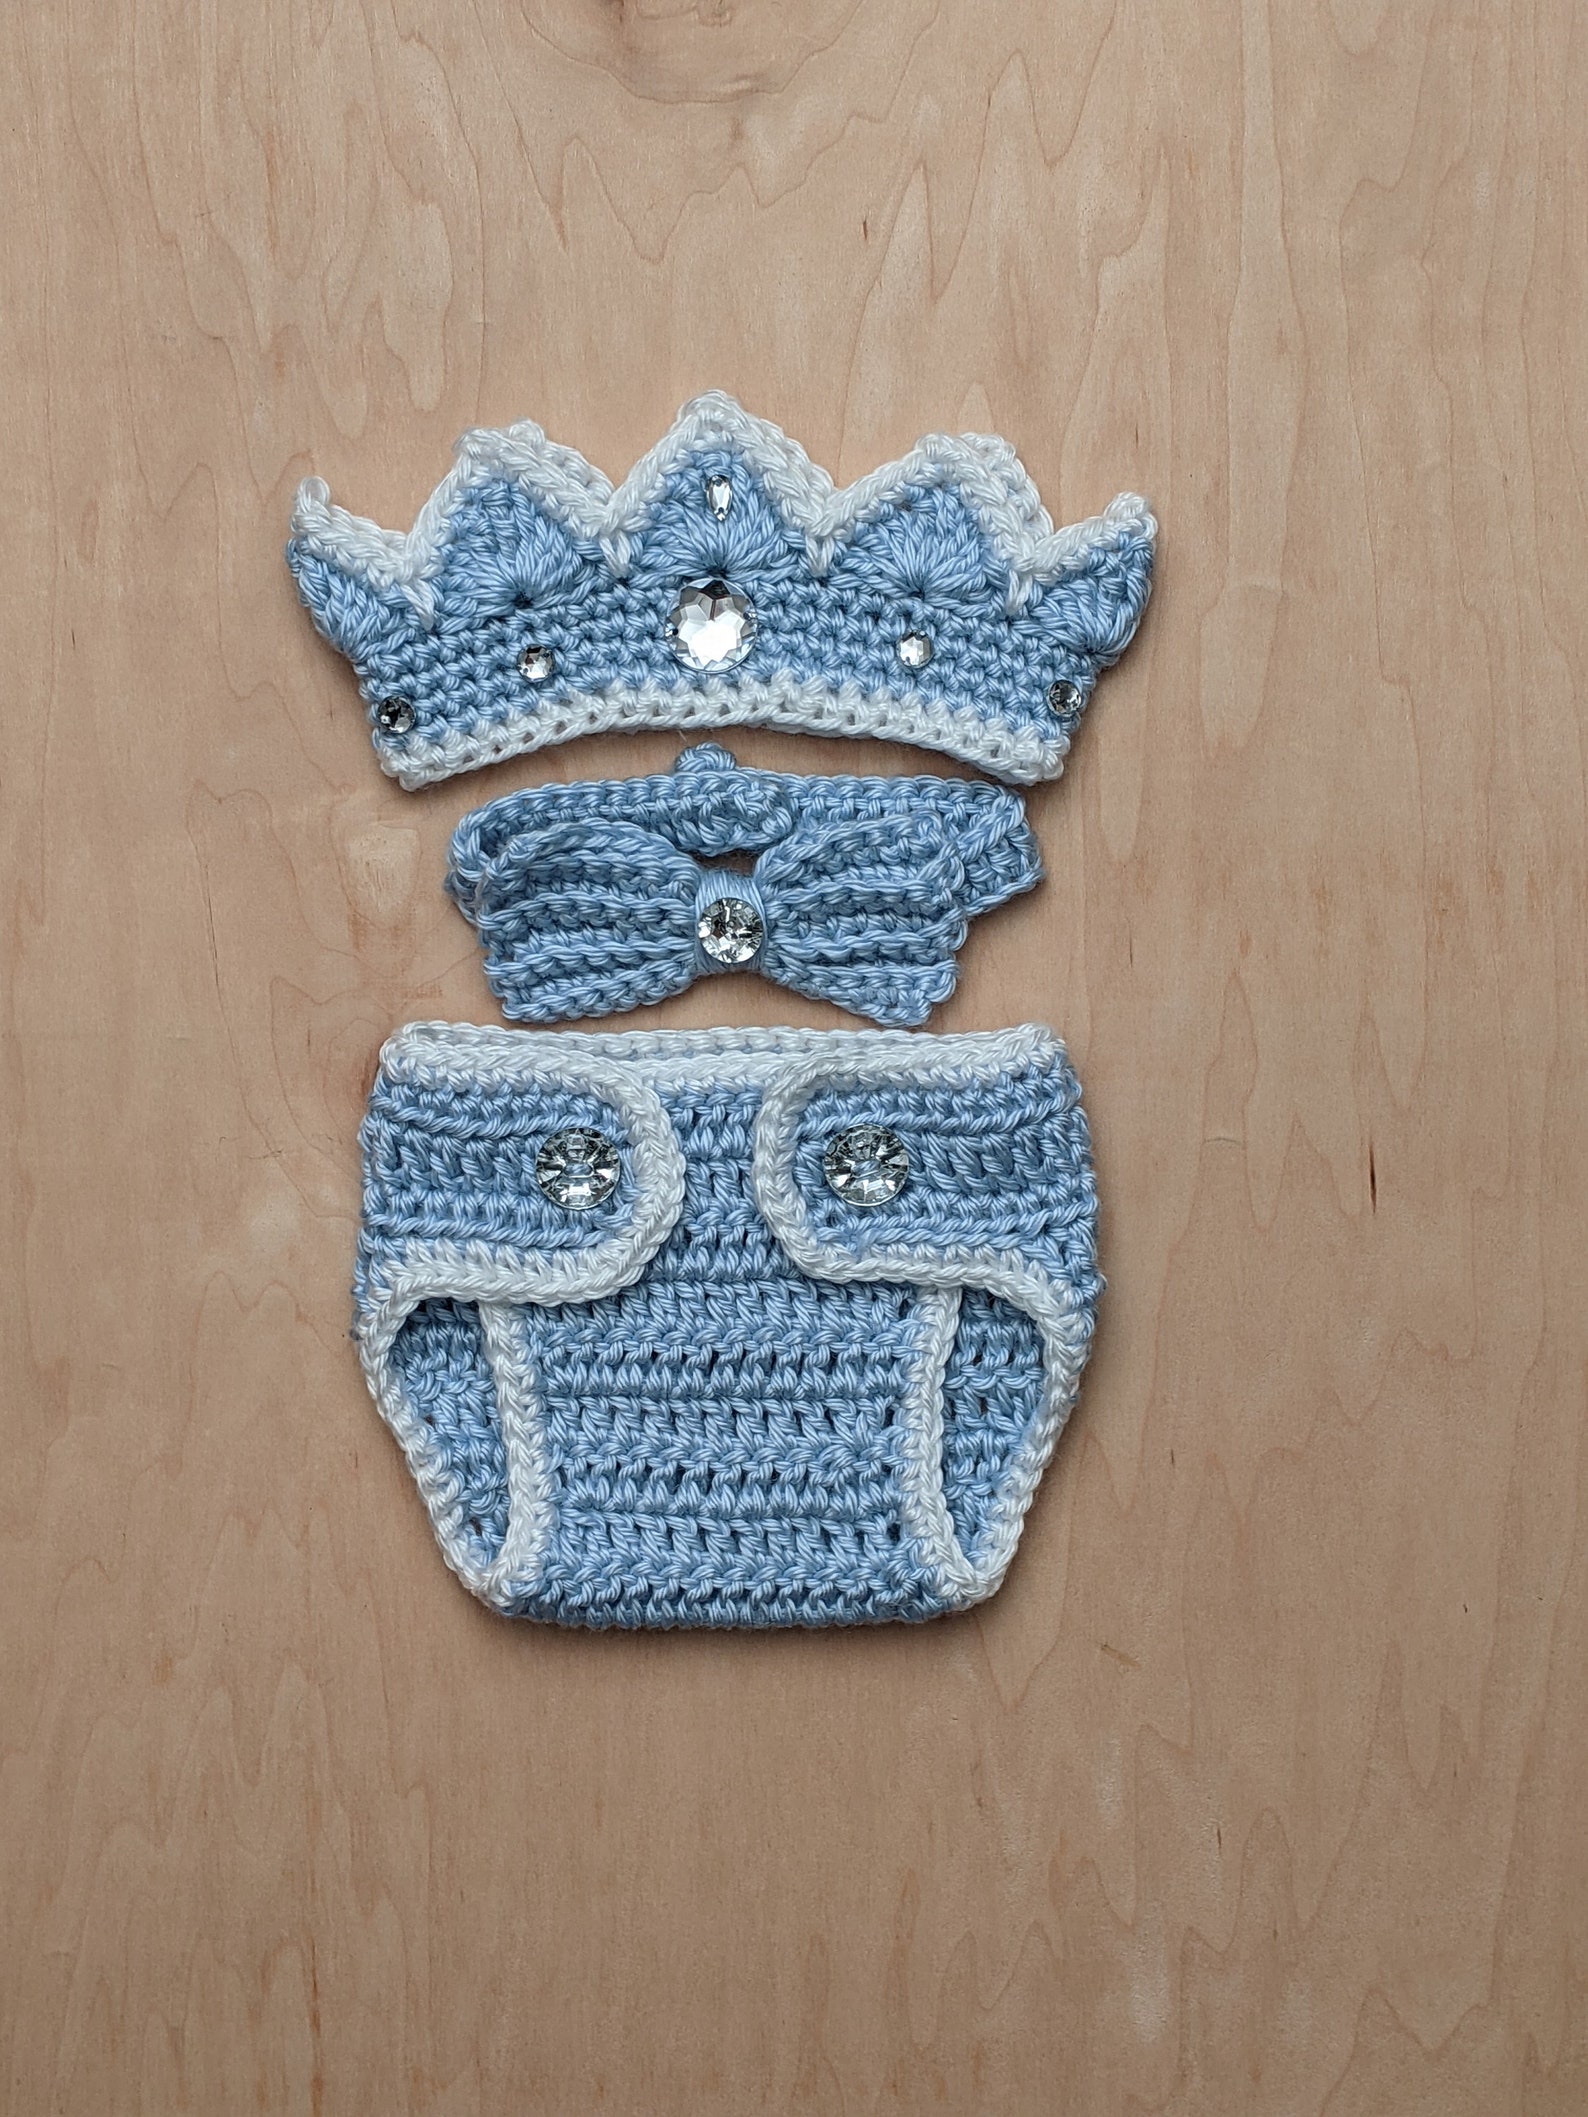 Crochet King Baby Set: Crown Diaper Cover Bow Tie Booties | Etsy